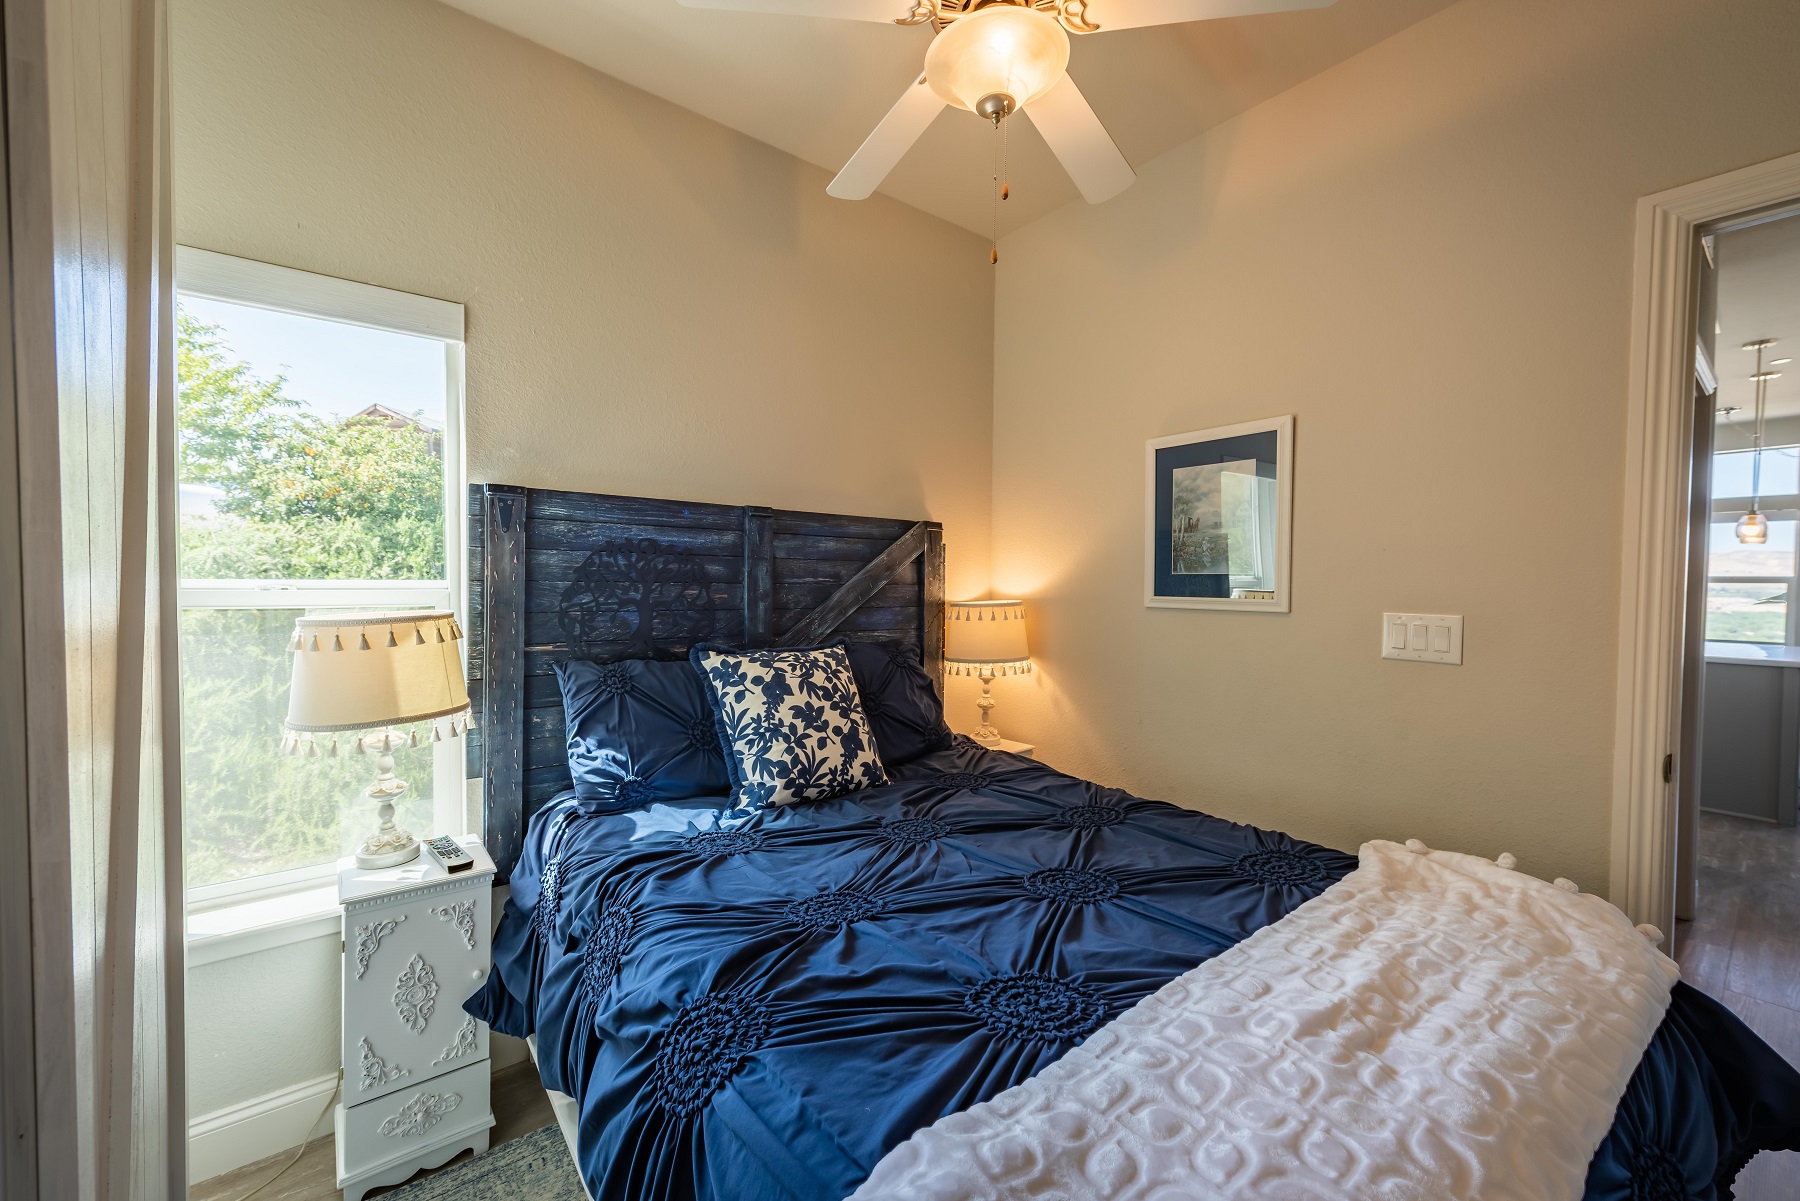 Guest room with Full bed and ceiling fan.